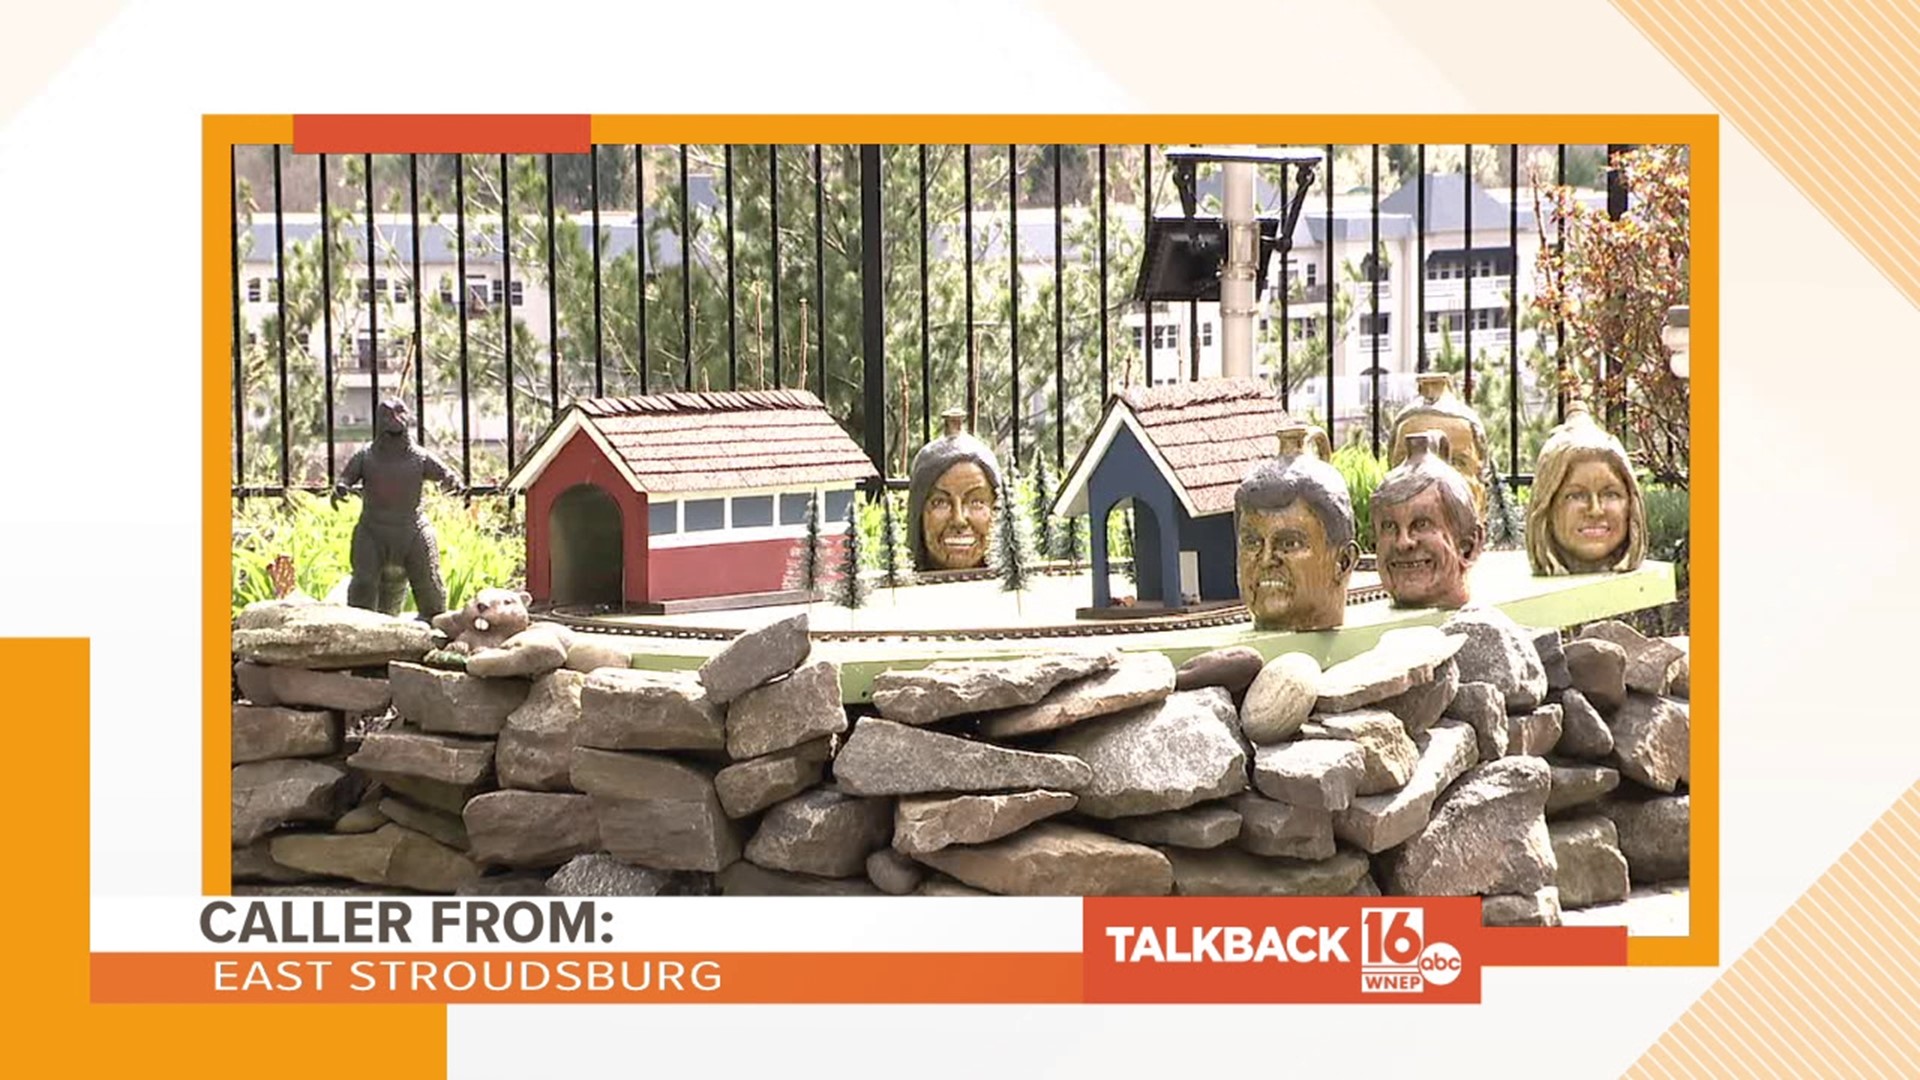 Some callers have ideas for the backyard decorations.